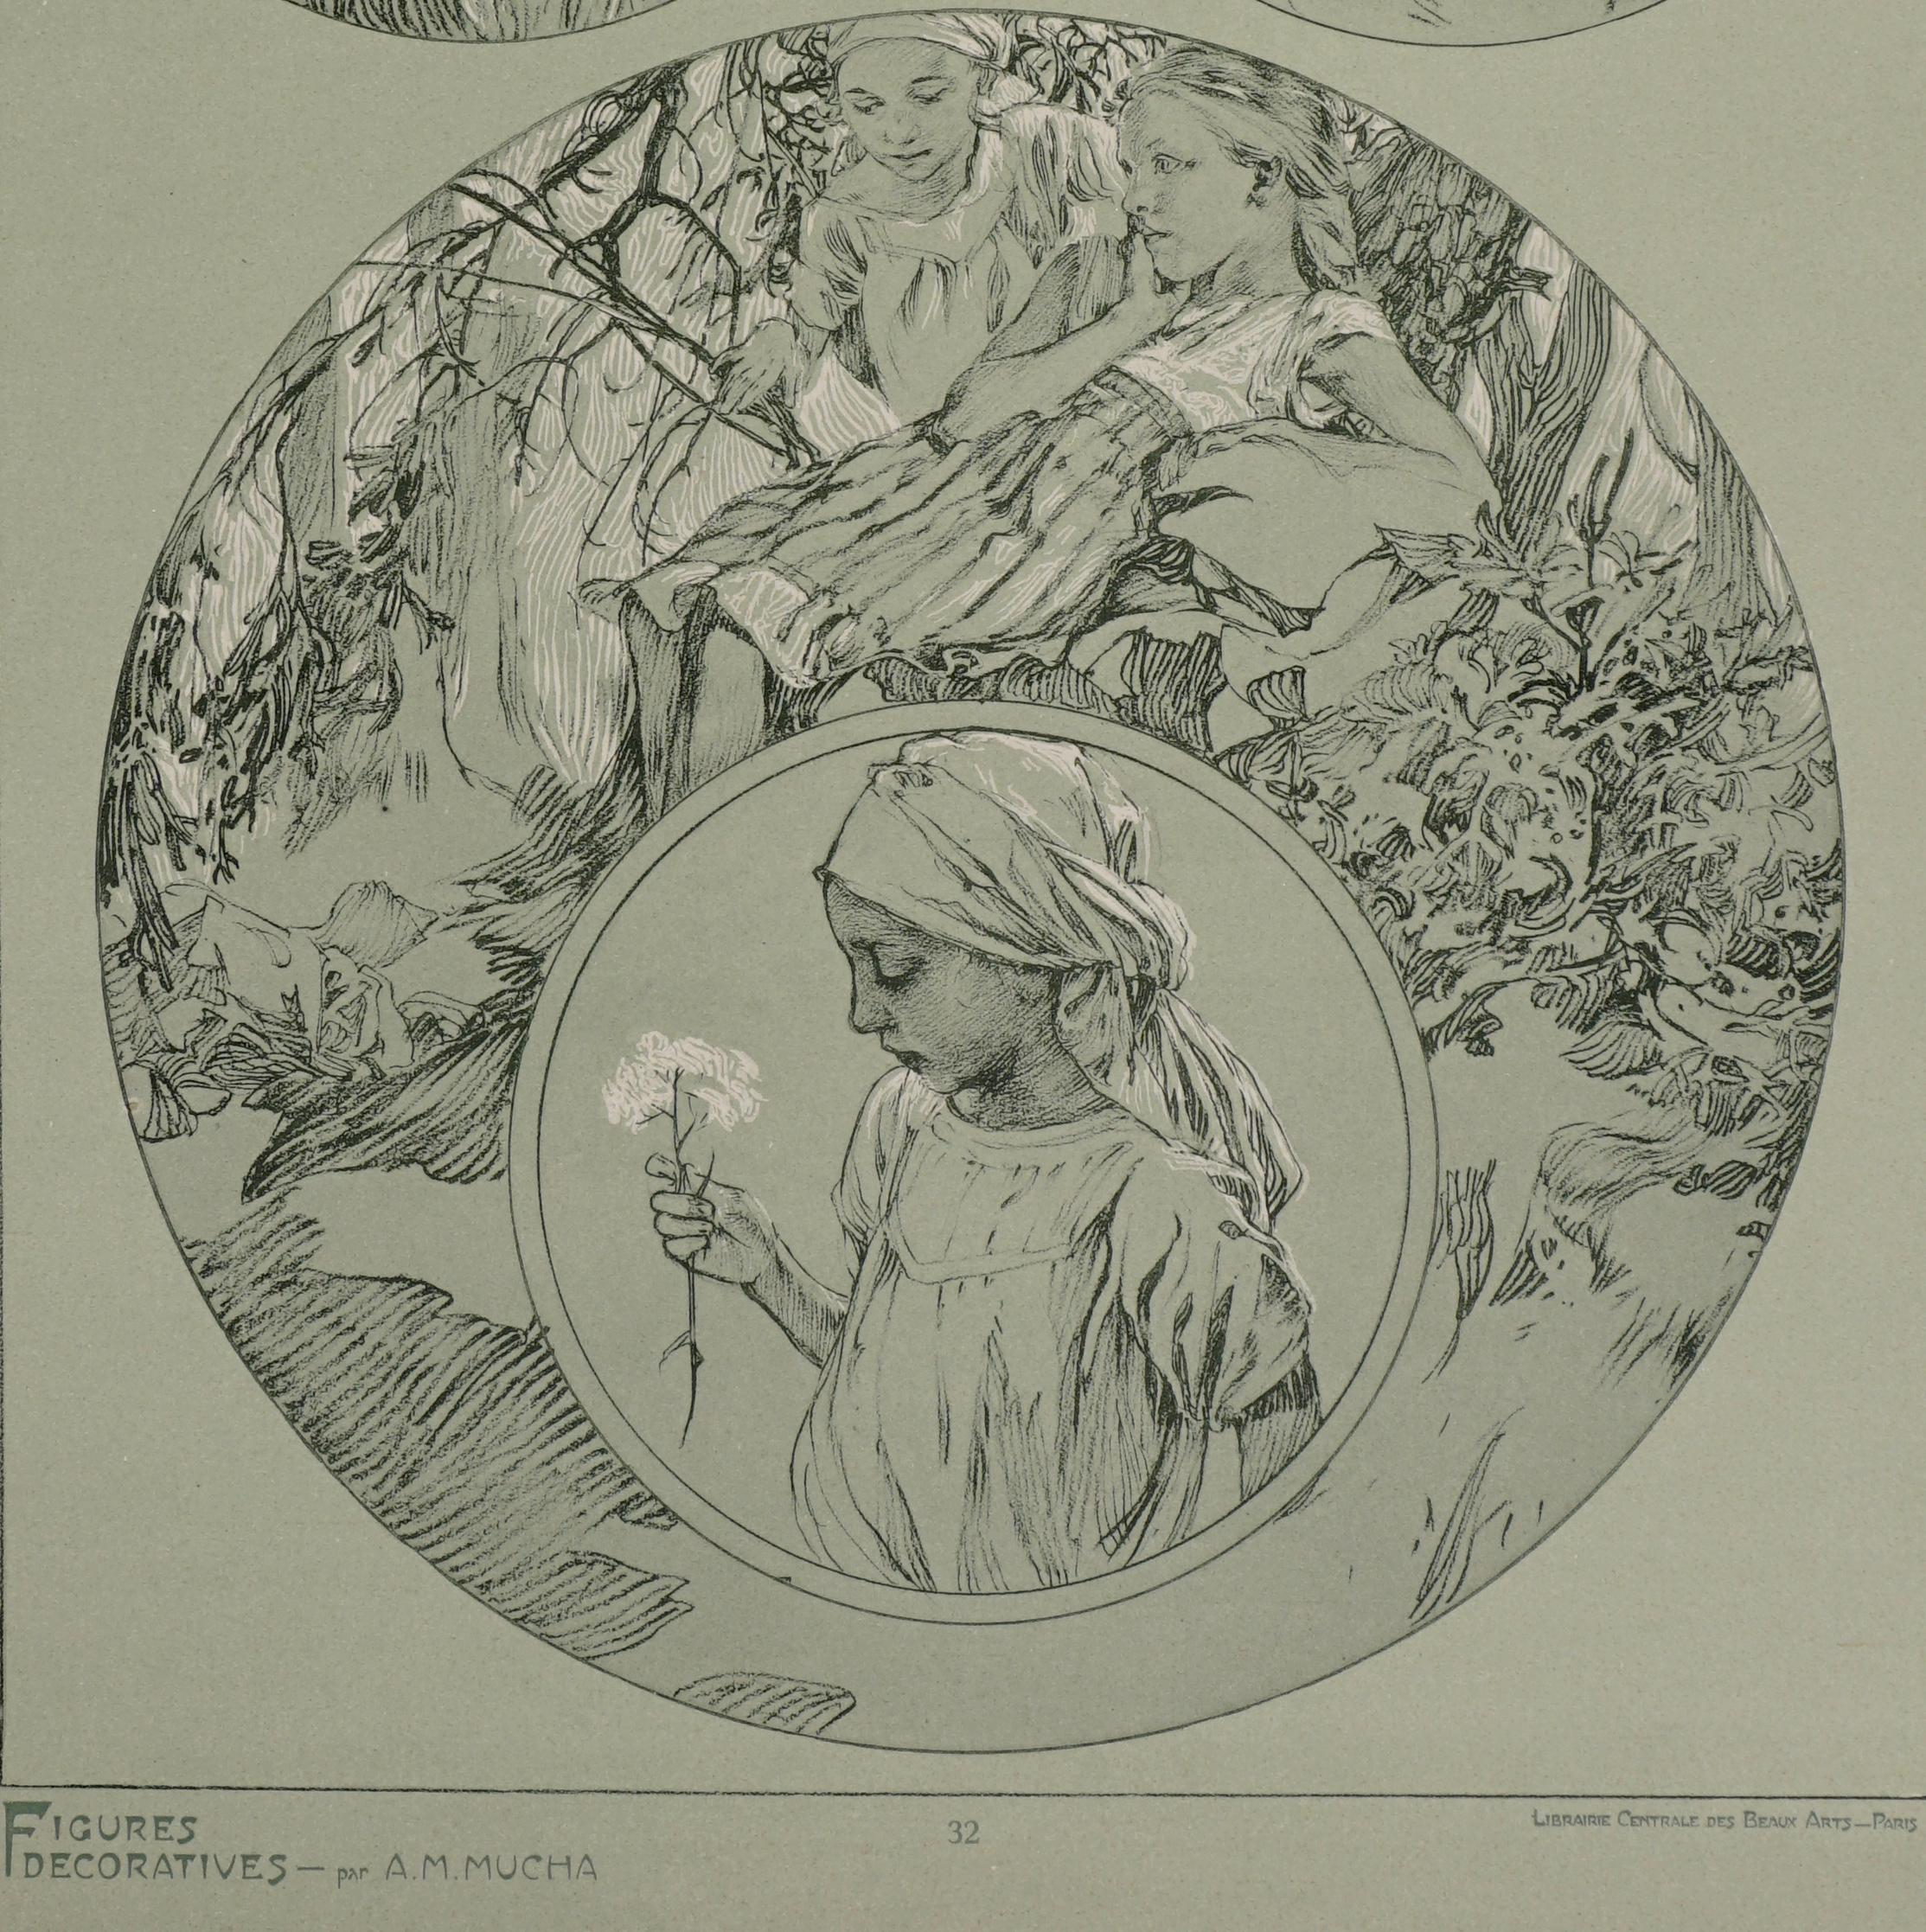 French Alphonse Mucha Poster from Figures Decoratives 1905. Plate 32